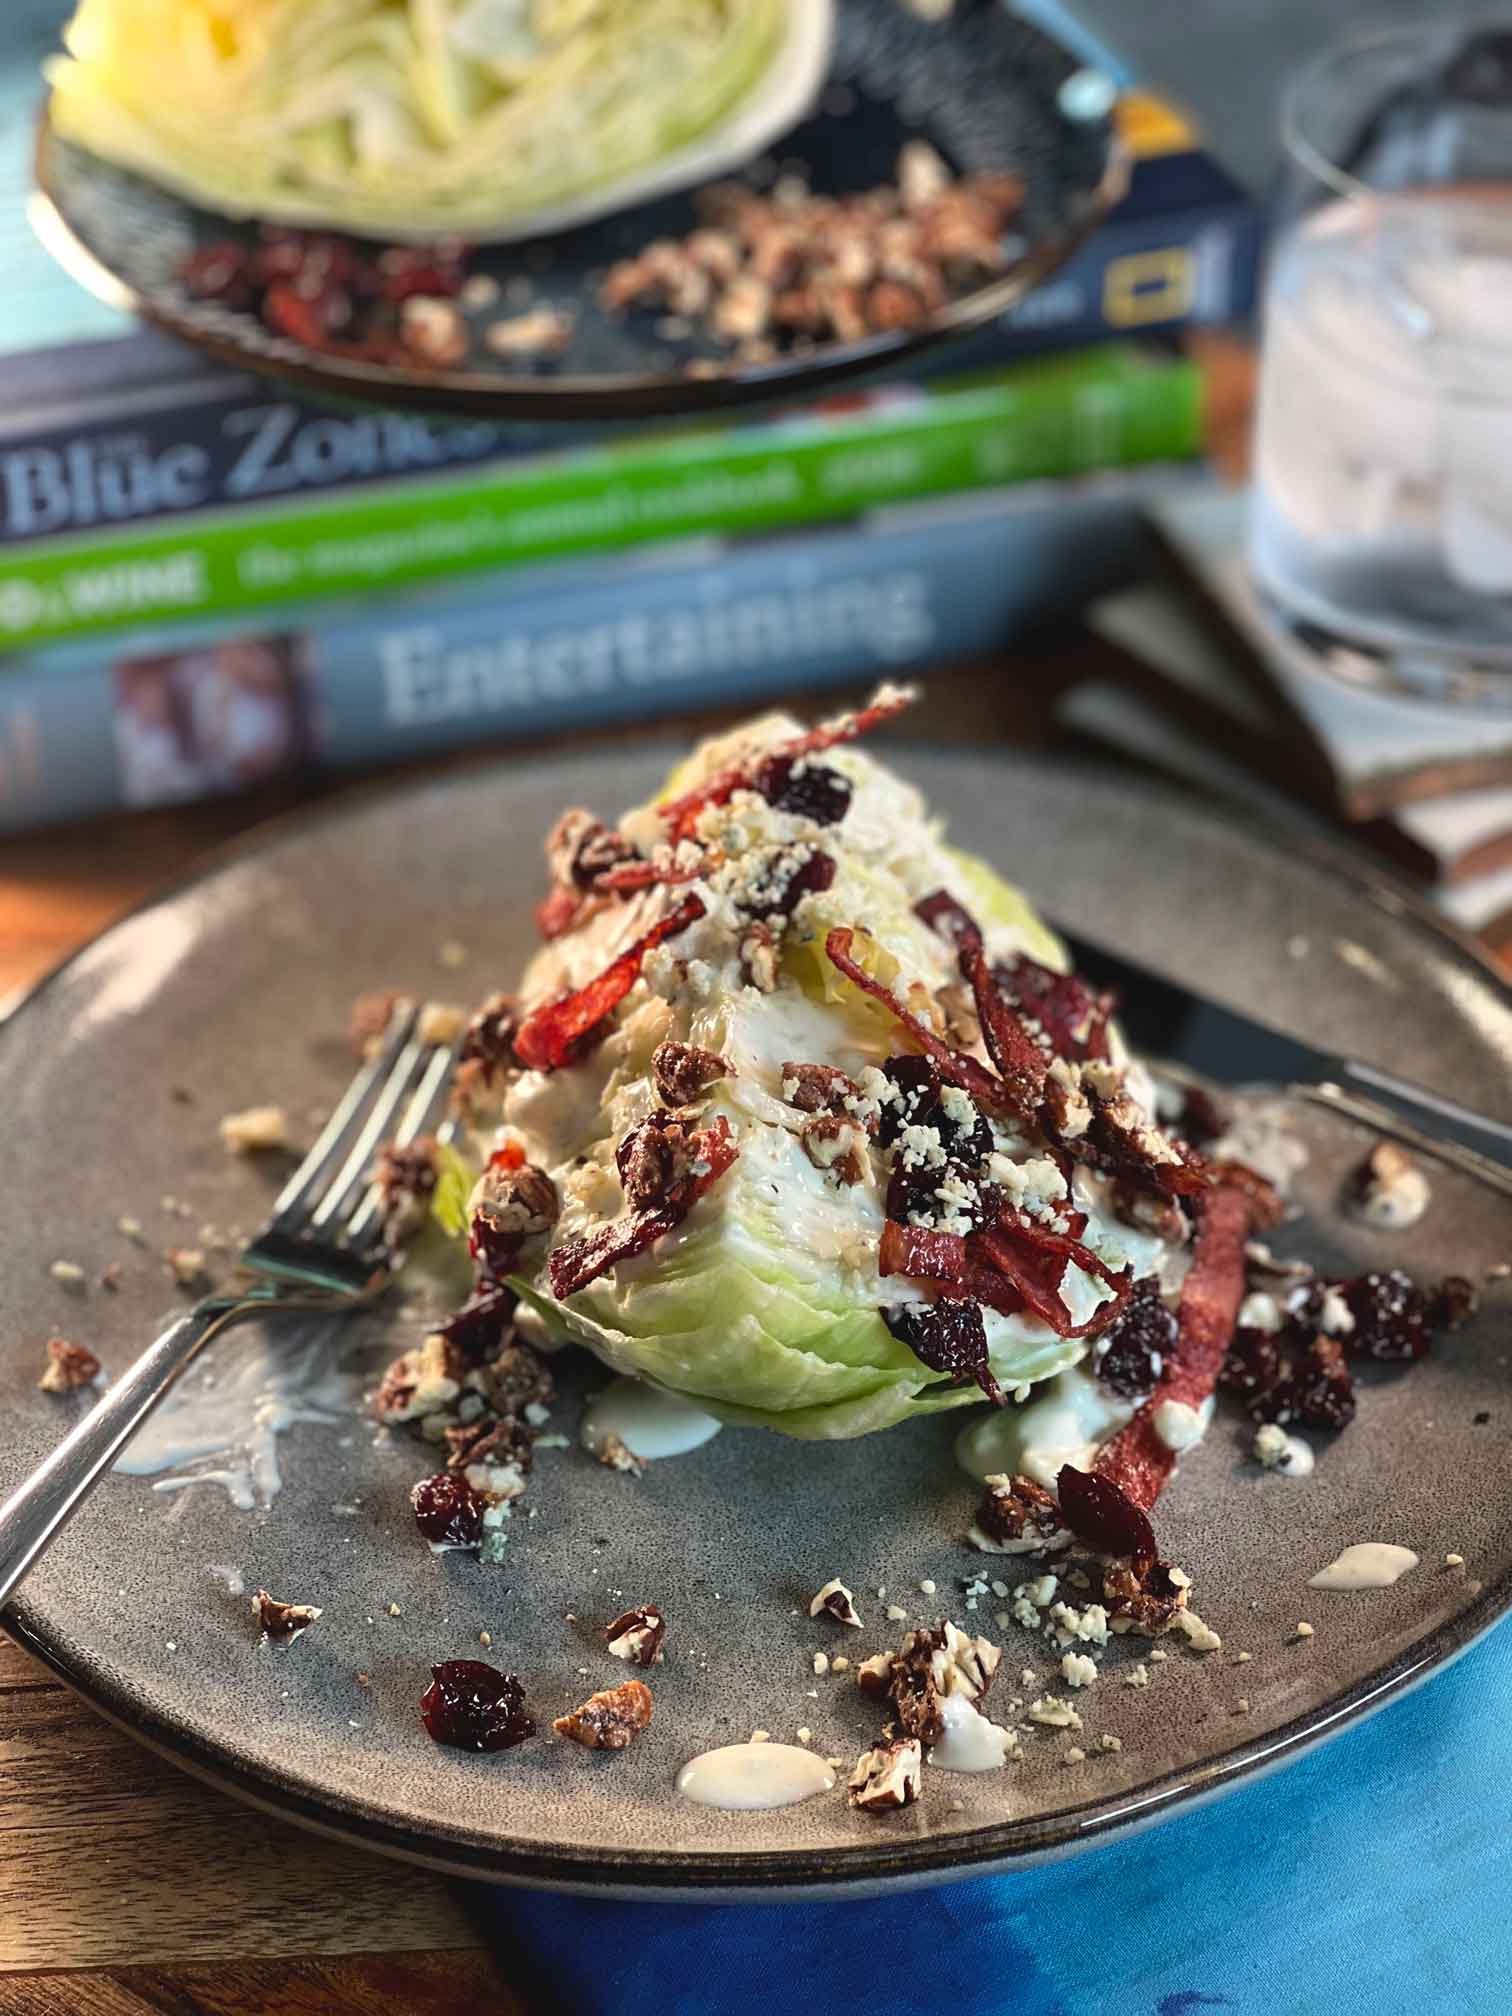 Wedge salad arranged on plate with crispy salami, candied pecans, blue cheese and dressing.